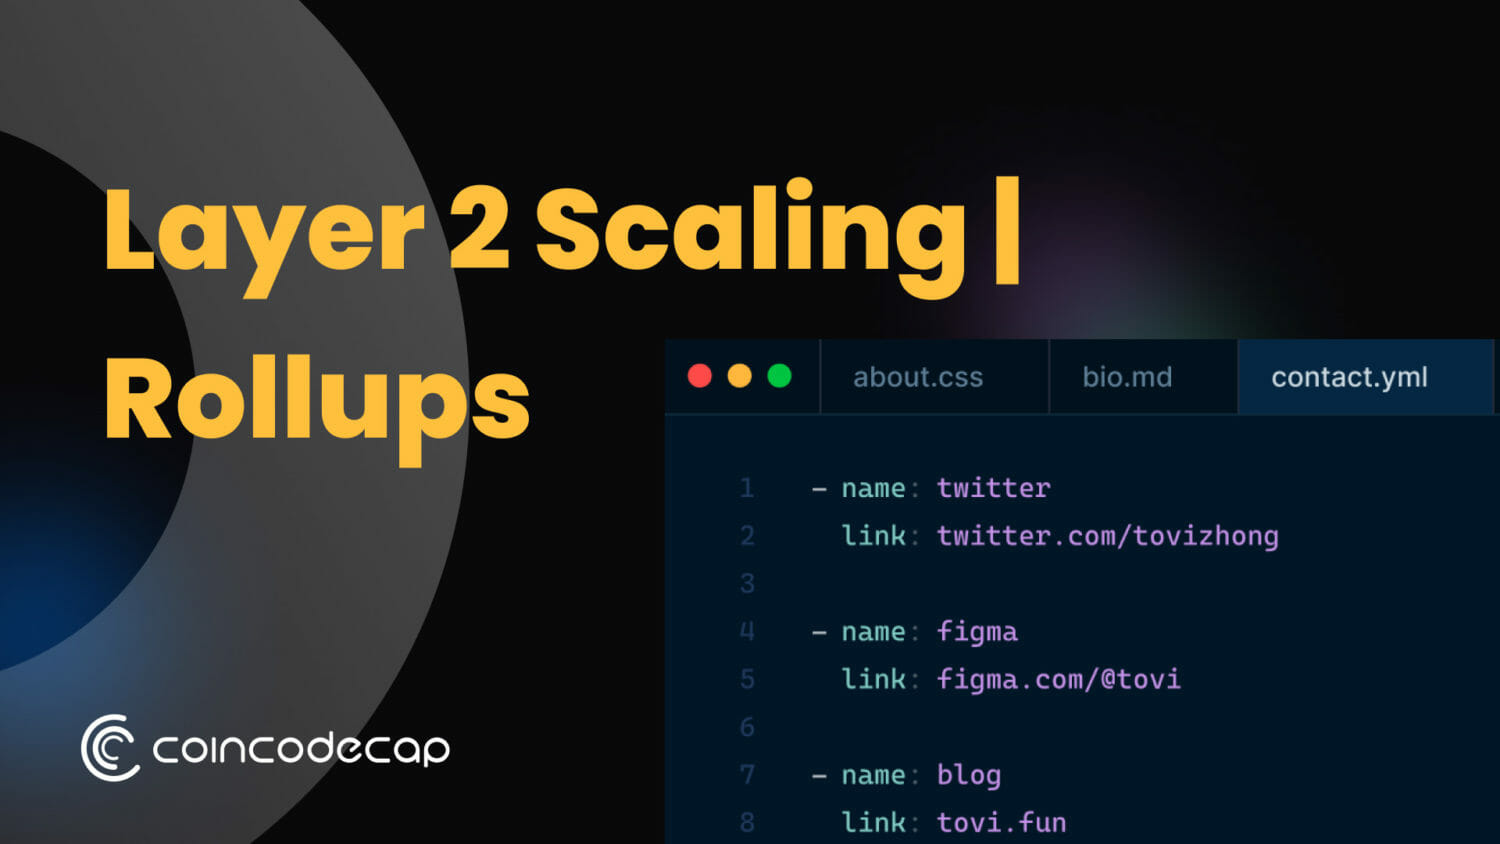 Layer 2 Scaling | Rollups